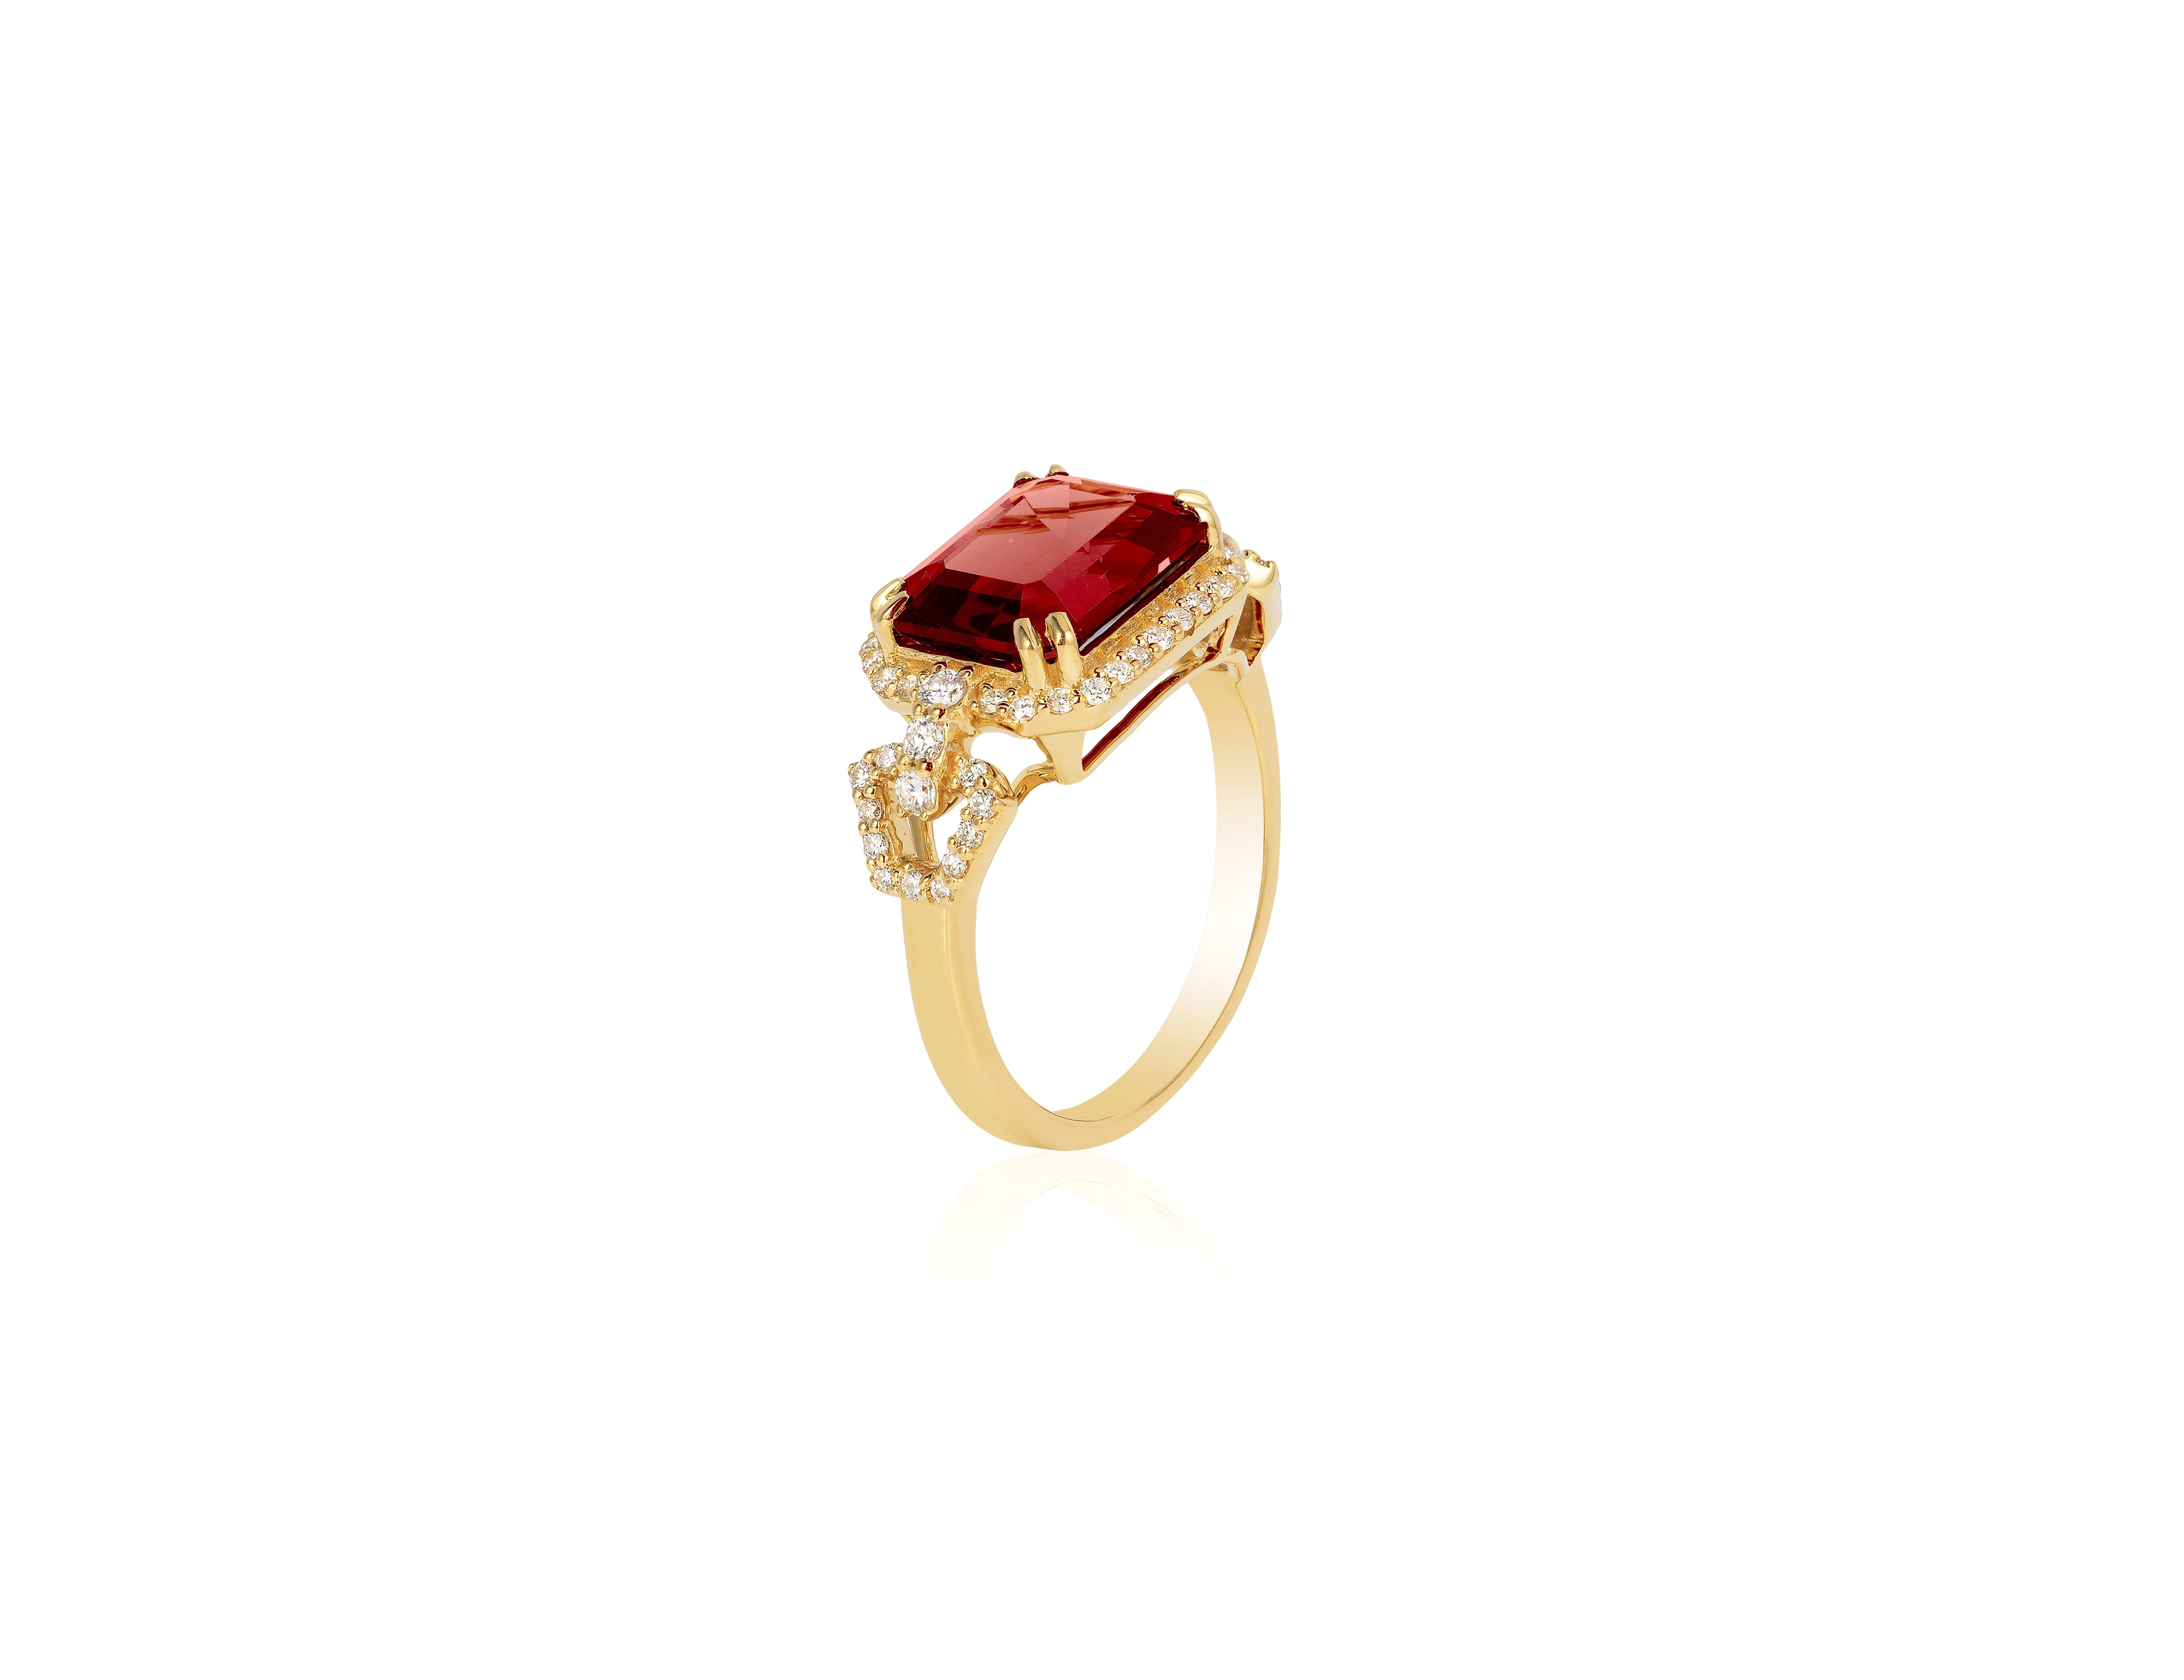 Garnet Small East-West Emerald Cut Ring with Diamonds in 18K Yellow Gold, From 'Gossip' Collection

Stone Size: 8 x 10 mm

Gemstone Approx Wt: Garnet- 3.25 Carats

Diamonds: G-H / VS, Approx Wt: 0.34 Carats 